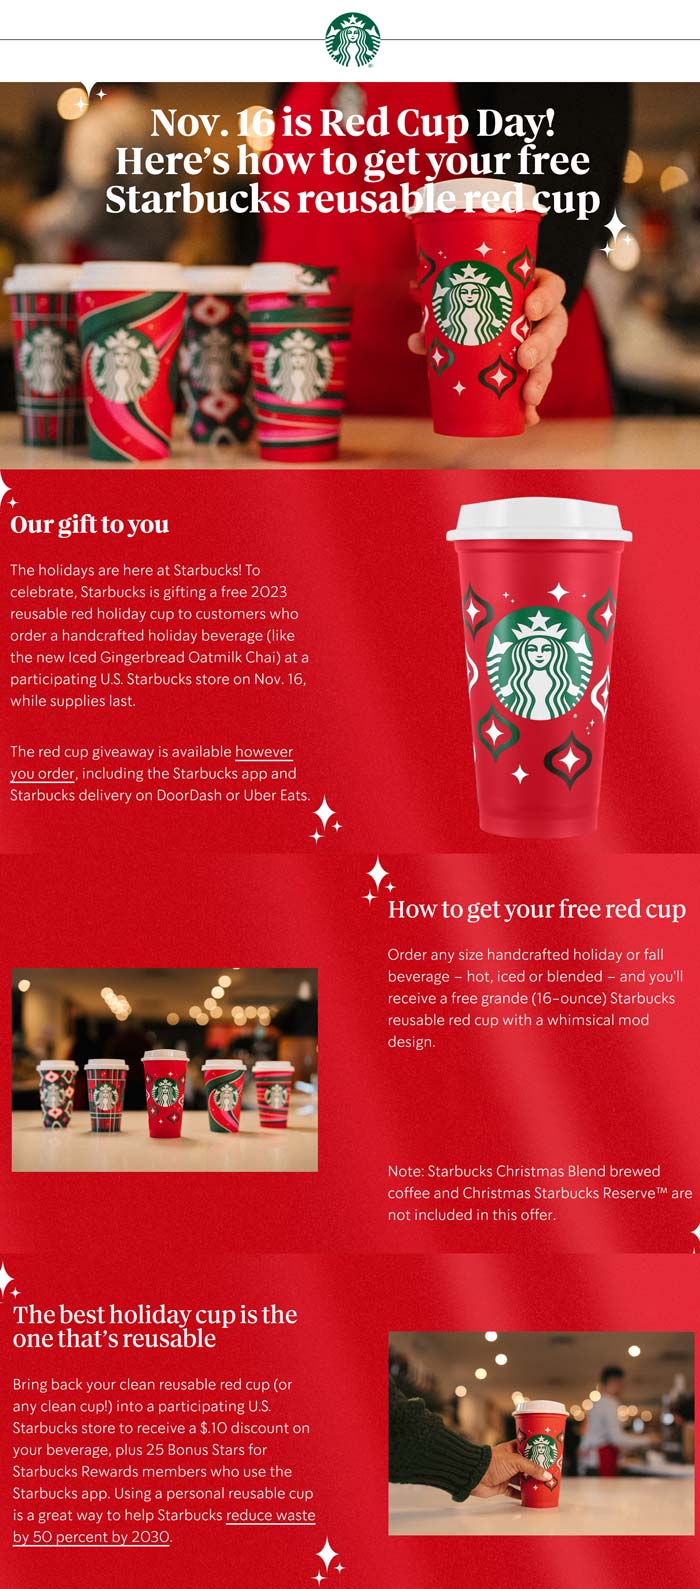 Free reusable red cup day today at Starbucks coffee #starbucks